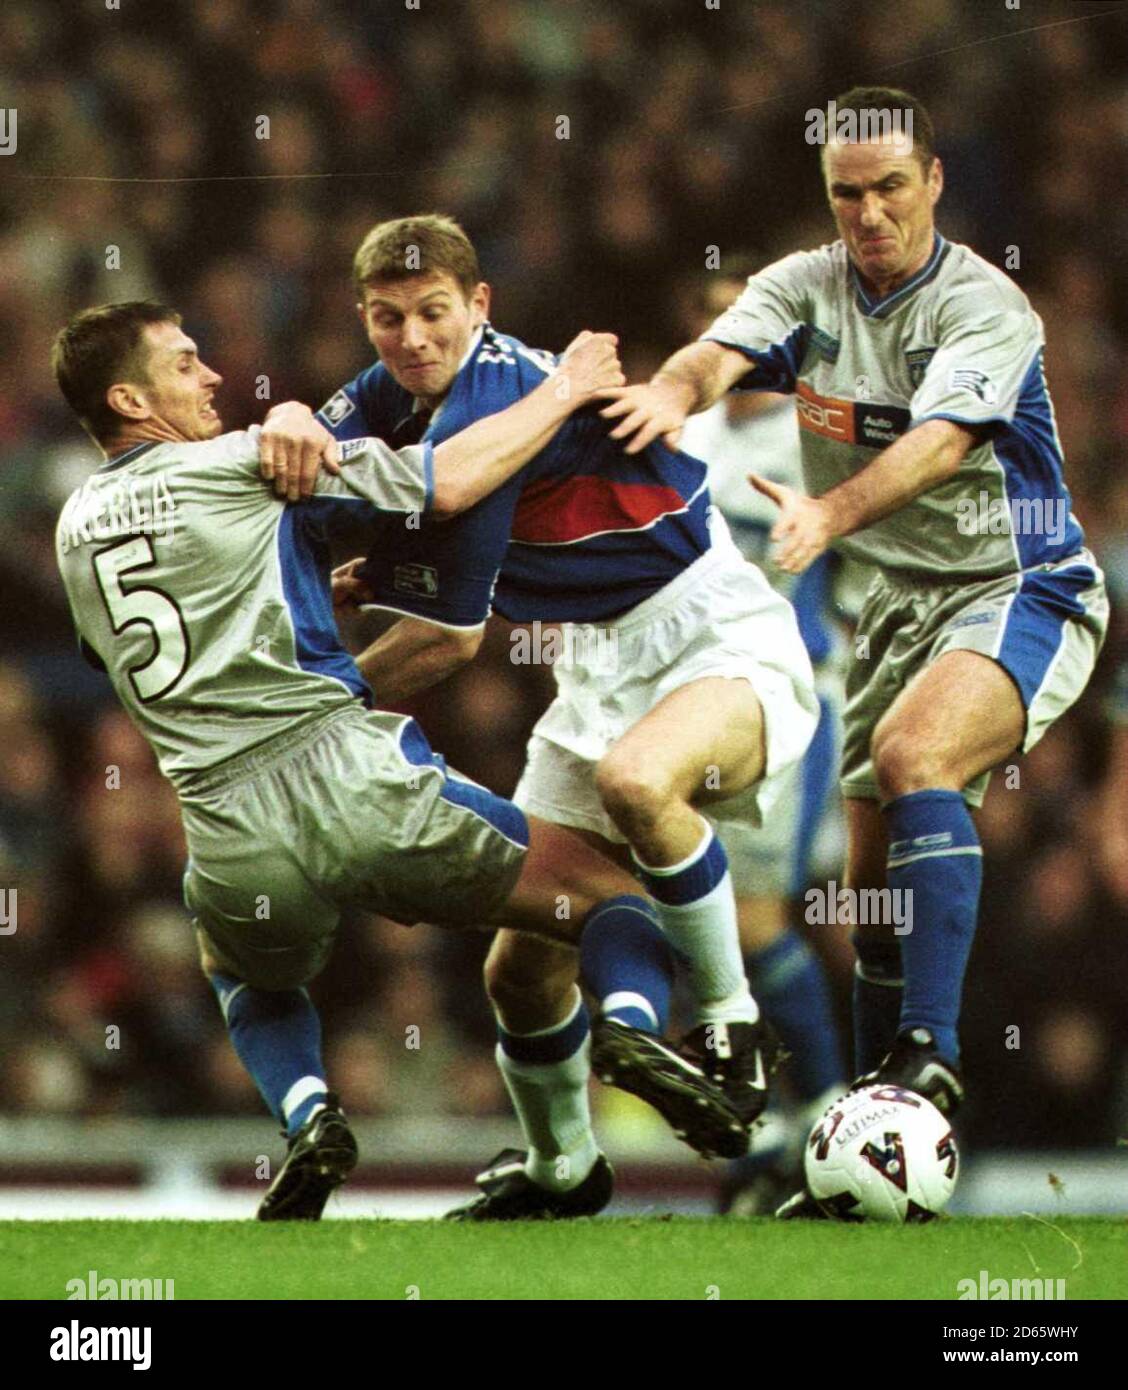 Rangers Tore Andre Flo is held back by Dunfermline Athletic's Andrius Skerla (left) and Ian Ferguson (right). Stock Photo